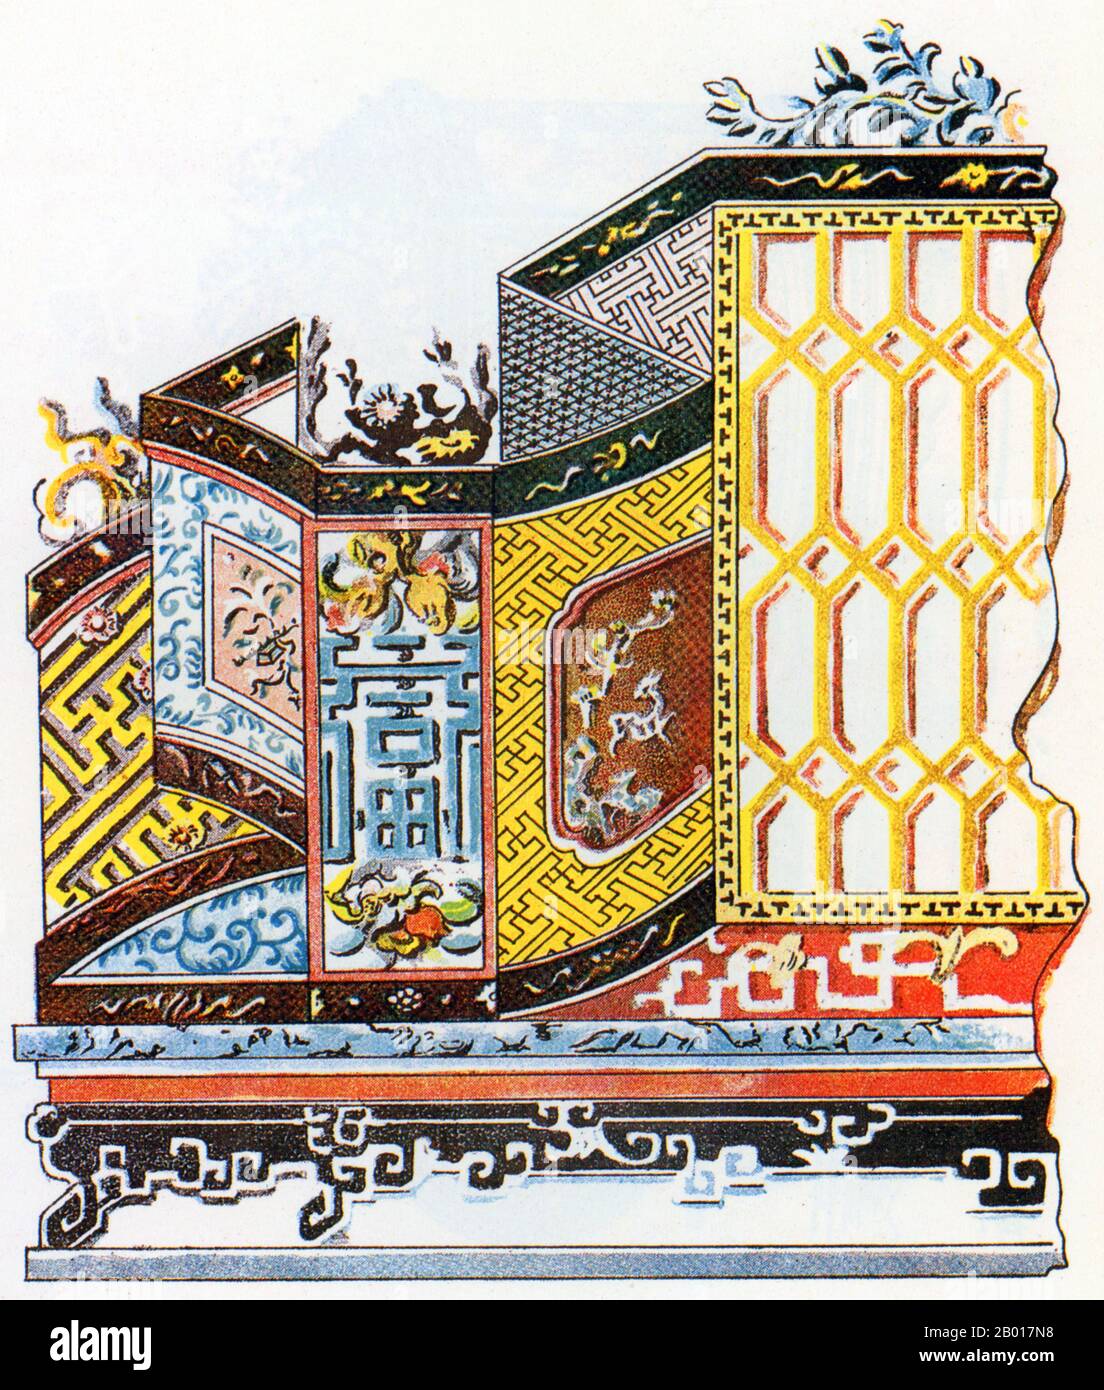 Vietnam: Decorative screen at the Palace of Co-Mat, Forbidden City, Hue, c. 1930.  Architectural drawing of art features in the Forbidden City at Huế, the imperial capital of Vietnam under the Nguyen Dynasty (1802-1945). The drawing was made for the Association des Amis du Vieux Hue (Association of the Friends of Old Hue) in the 1920s, before the disasters of 1947 and 1968. Today, less than a third of the structures inside the citadel remain.  In 1947 the French army shelled the building, and removed or destroyed nearly all the treasures it contained. Stock Photo